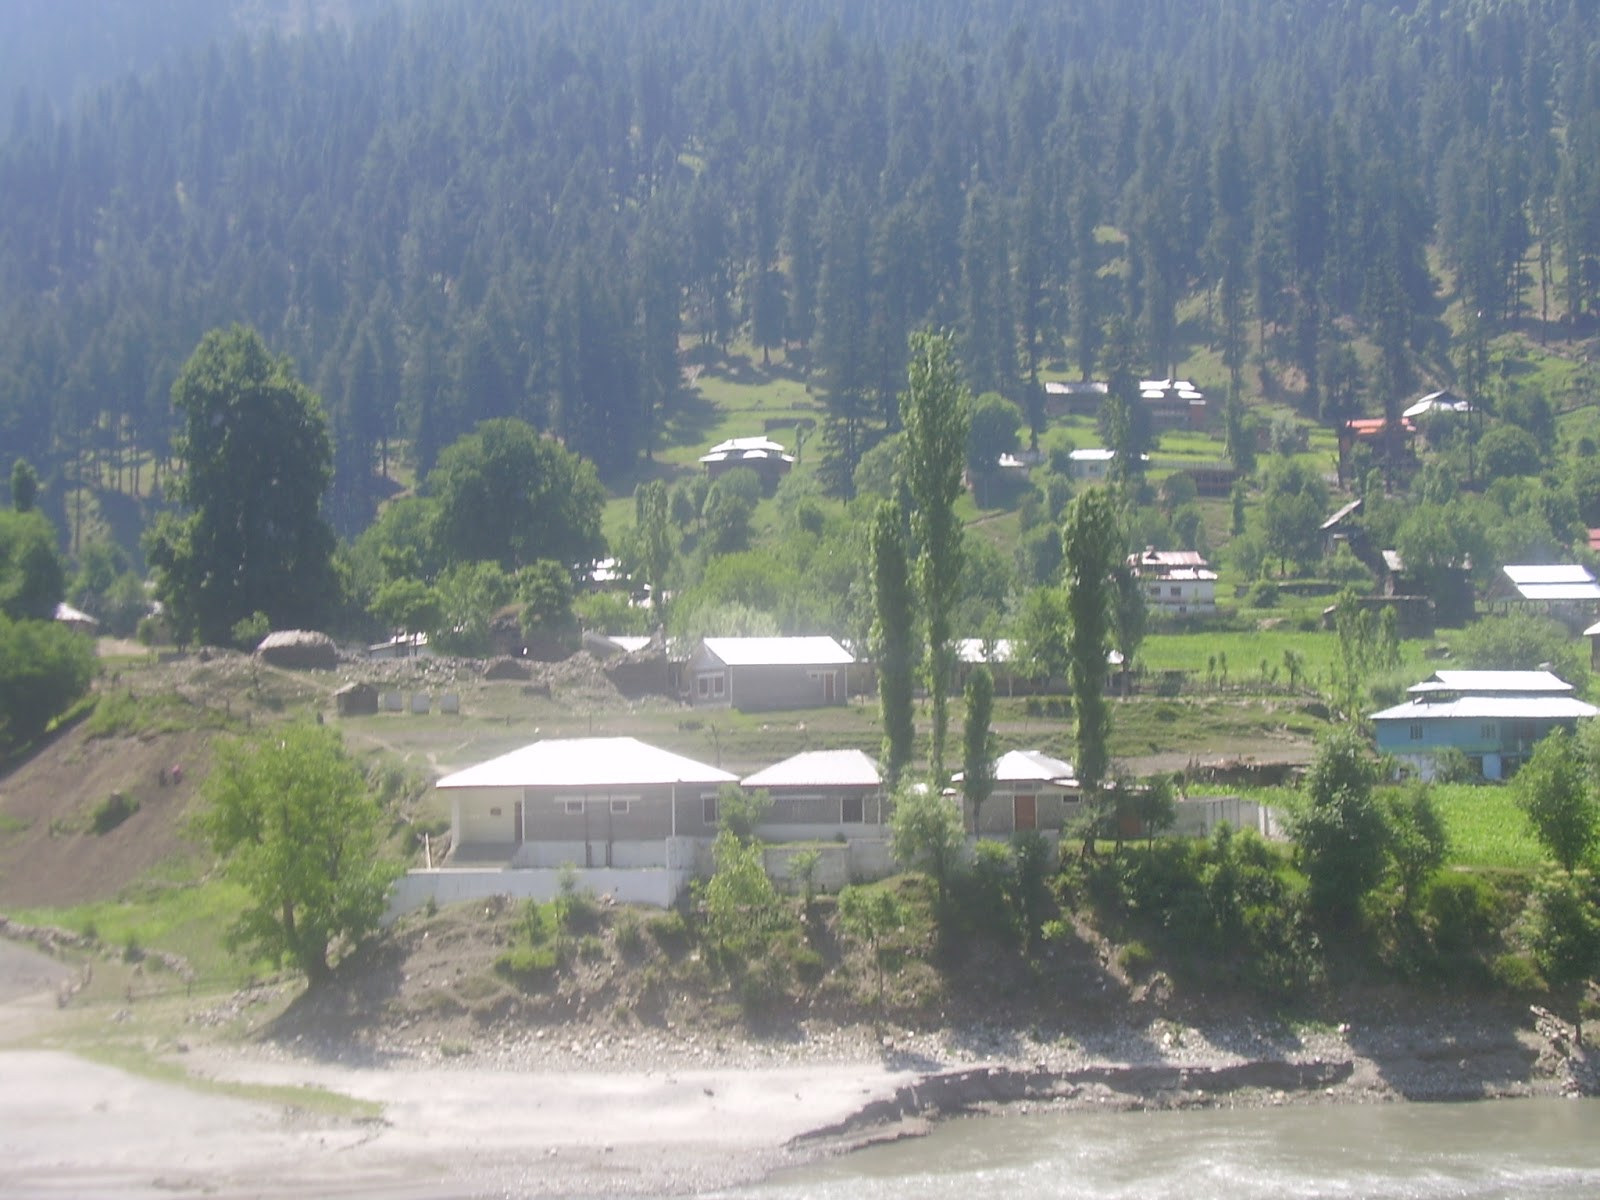 there is a beutiful rest house for visitors constructed tourism department of ajk government 4